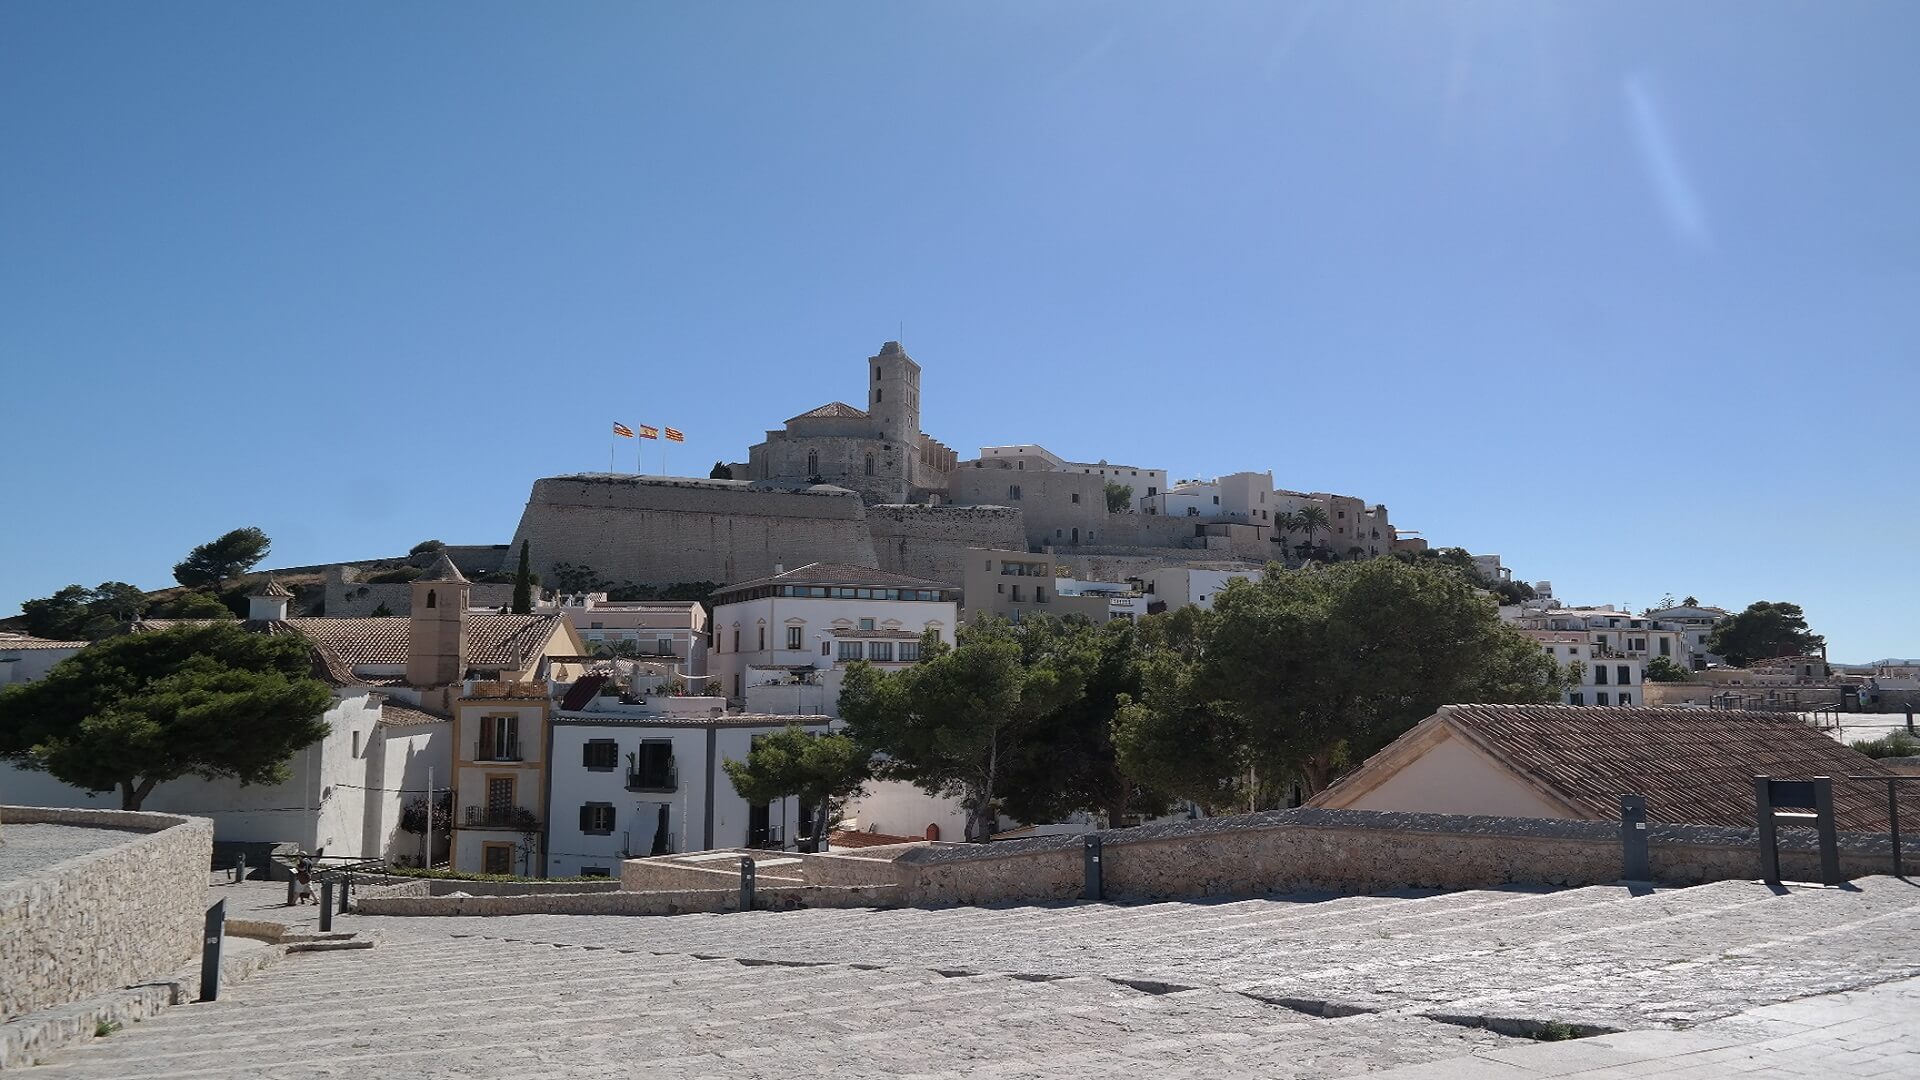 Medieval festival 2018 in Ibiza town